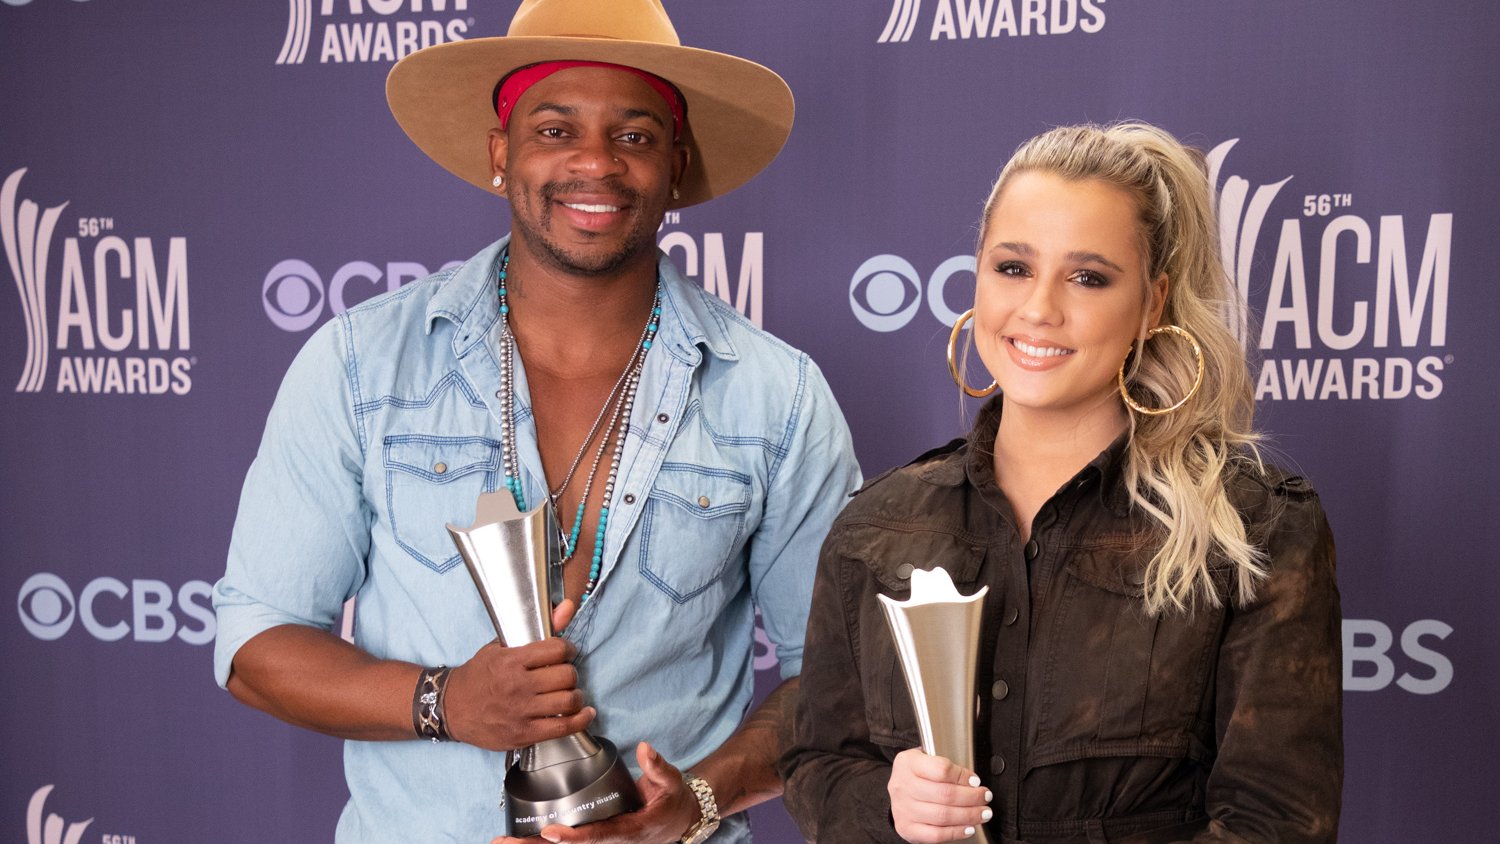 56th ACM Awards' New Male/Female Artist of the Year Winners Jimmie Allen and Gabby Barrett at the Grand Ole Opry in Nashville, TN
